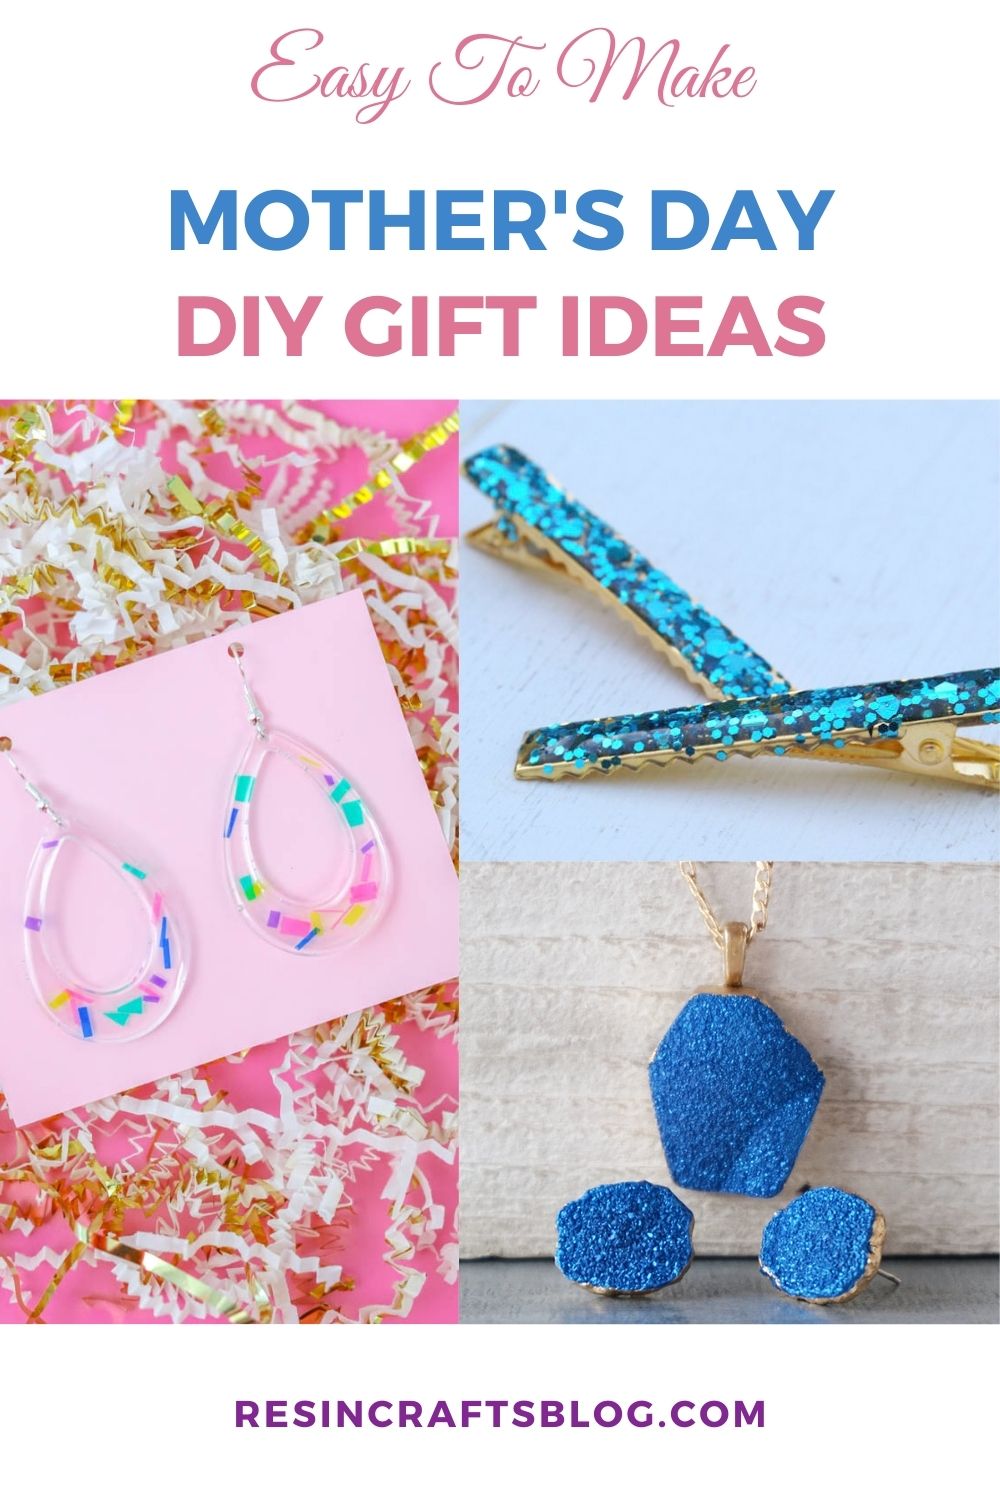 40+ Easy Handmade DIY Mother's Day Gifts - Feels Like Home™